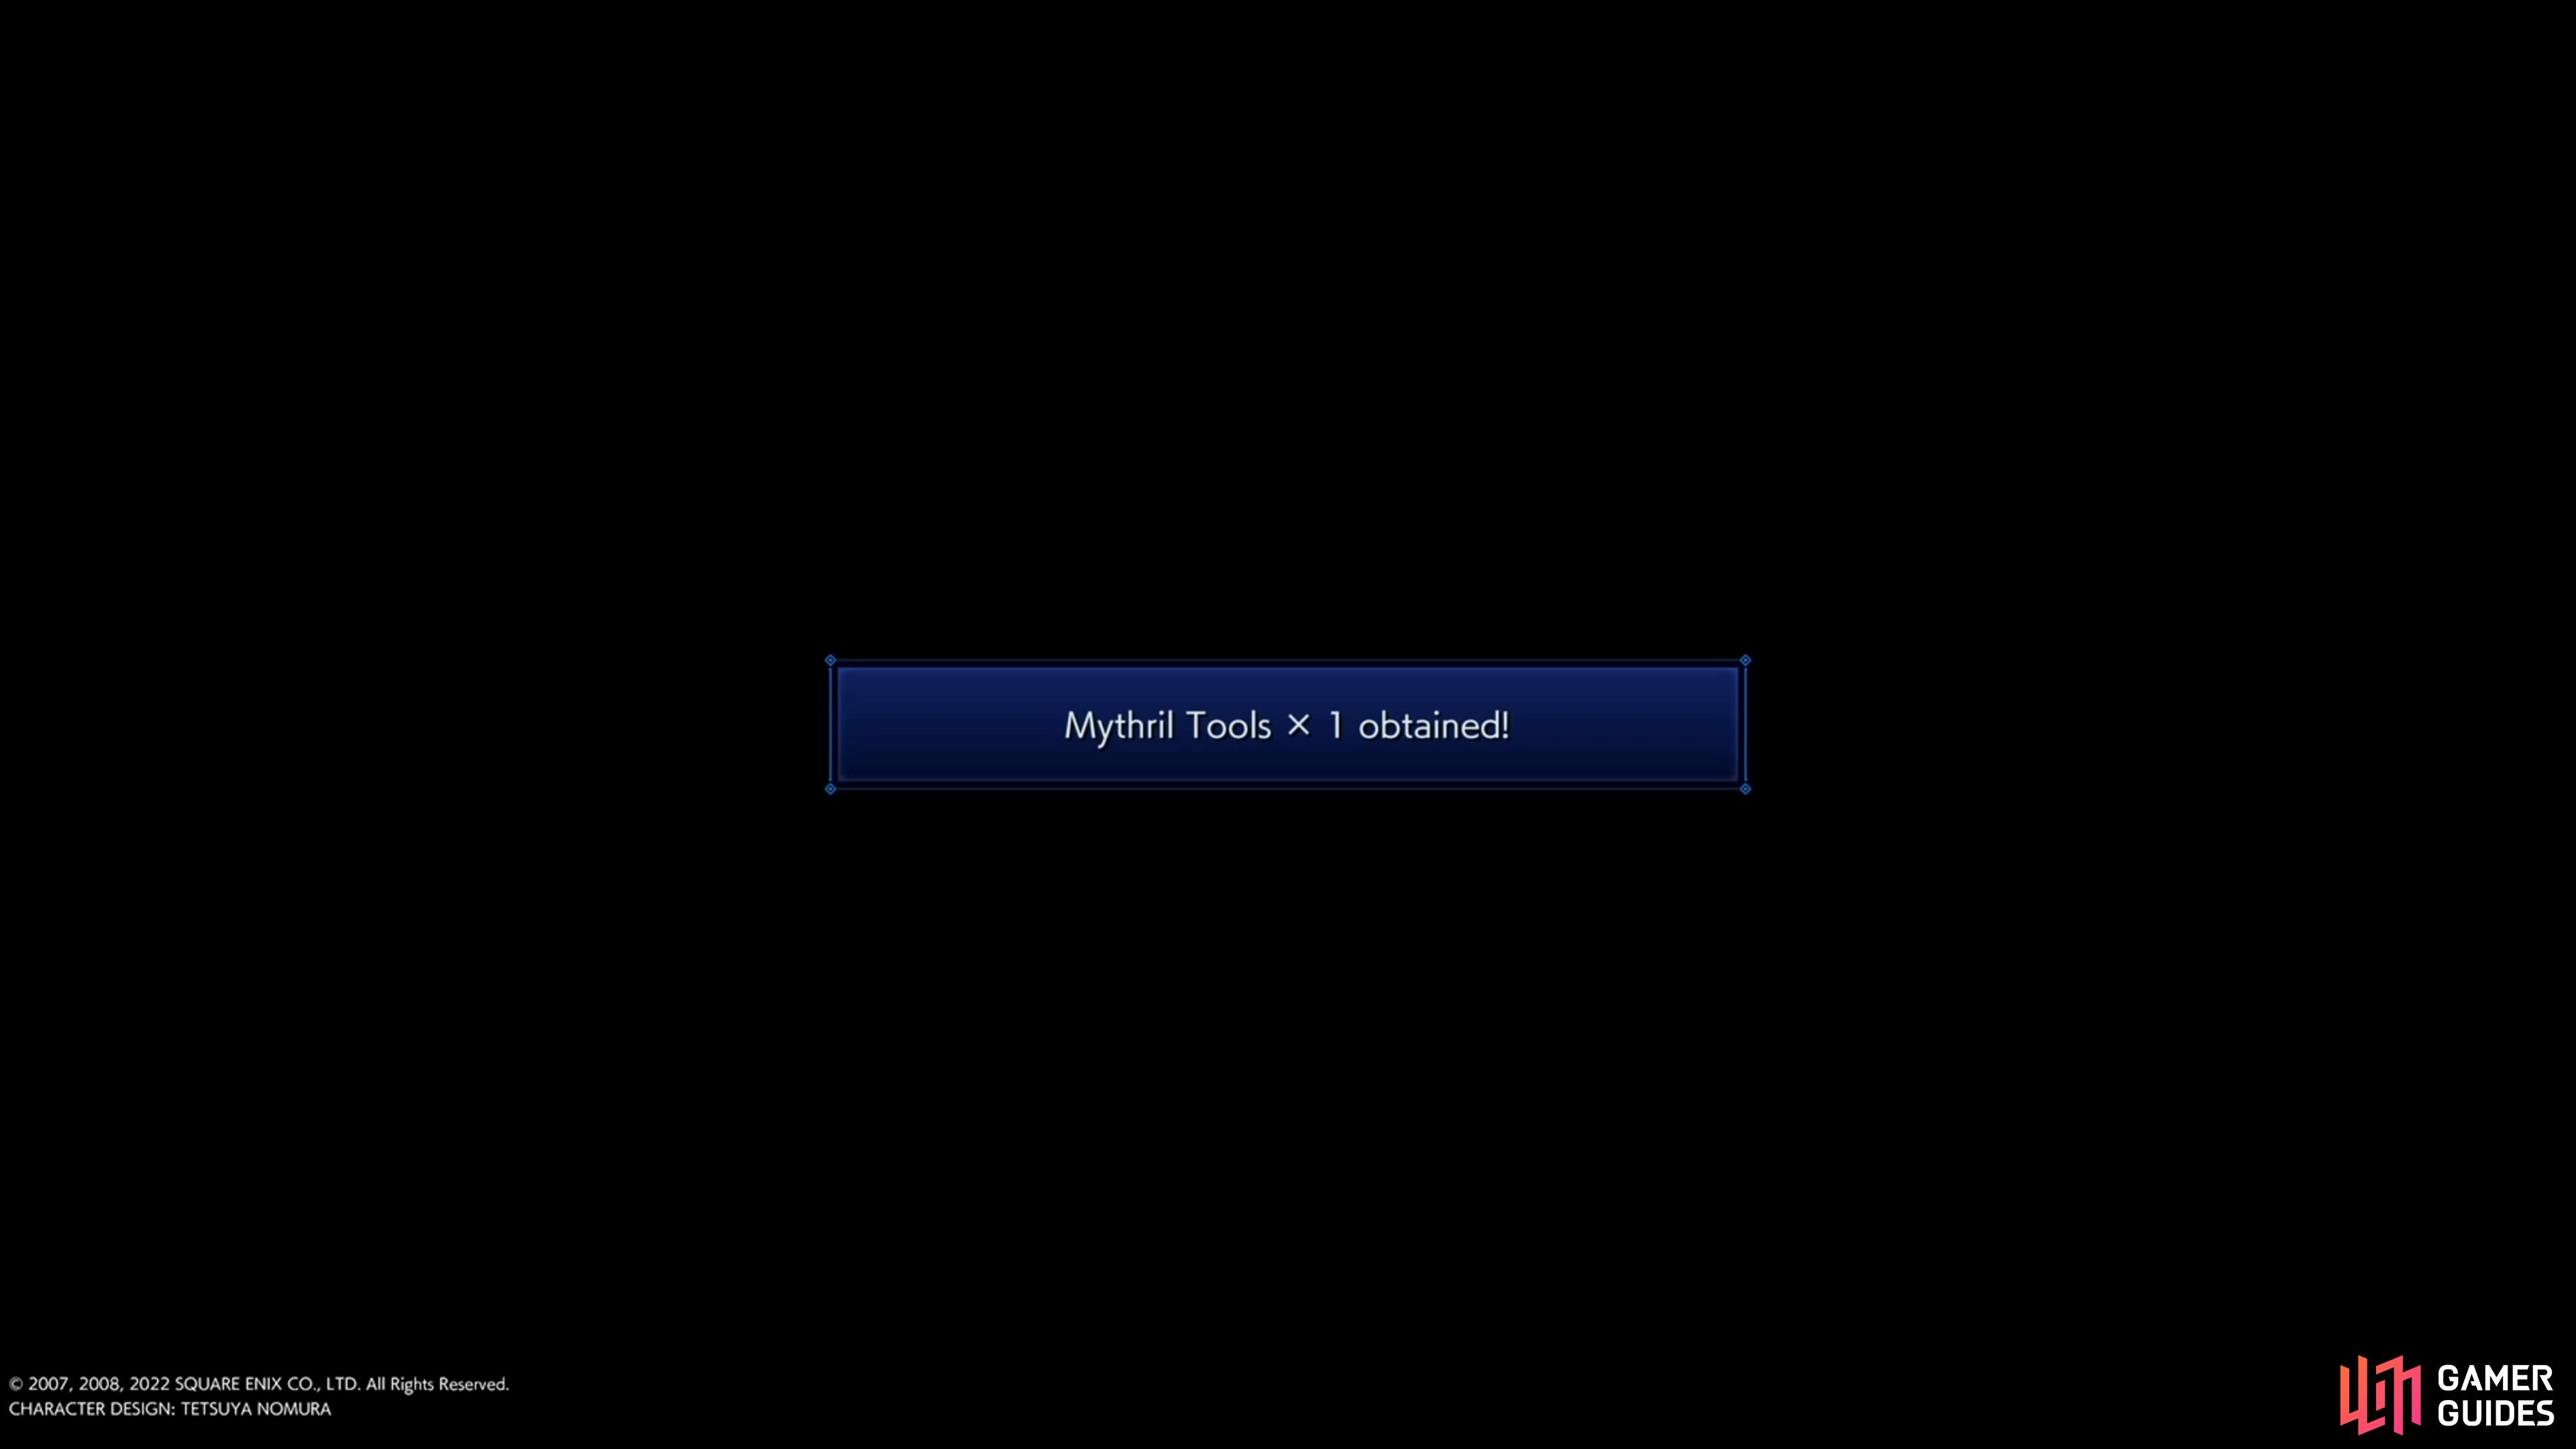 Don’t forget to return to the Researcher to get the !Mythril Tools key item